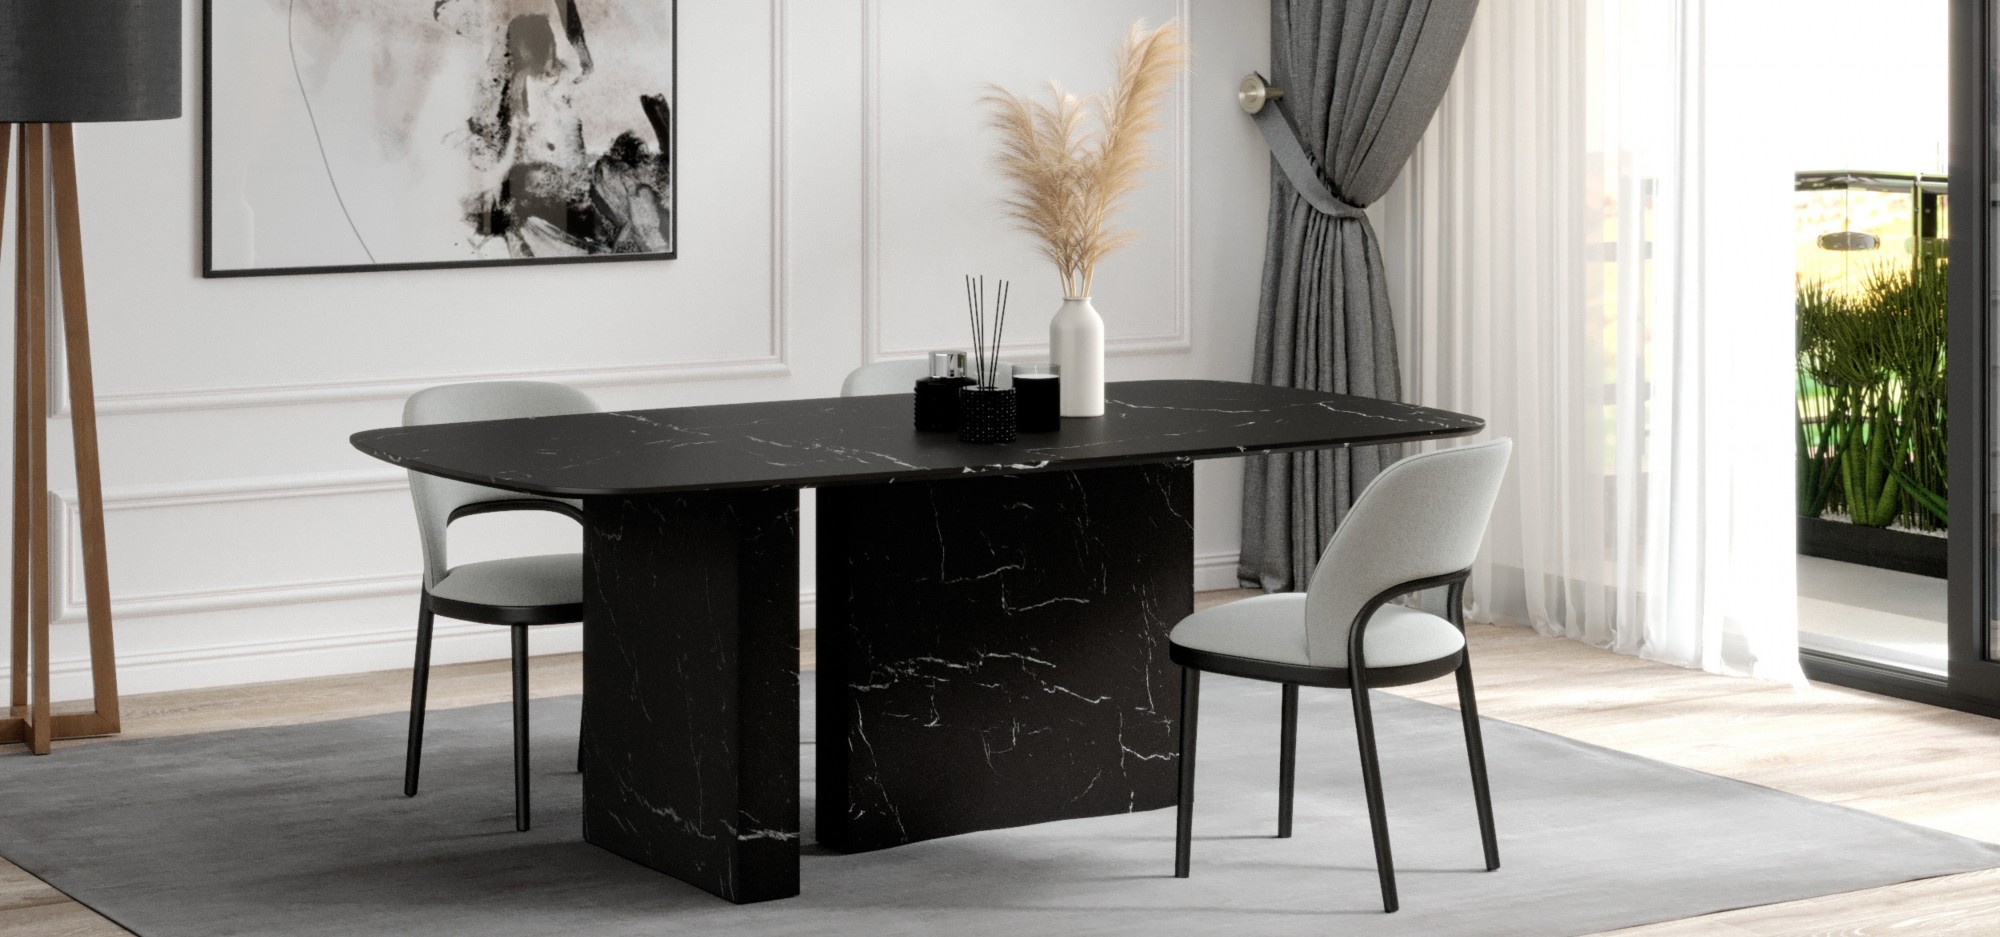 The elegance and sobriety of Nero Marquina marble on the ANTA dining table.